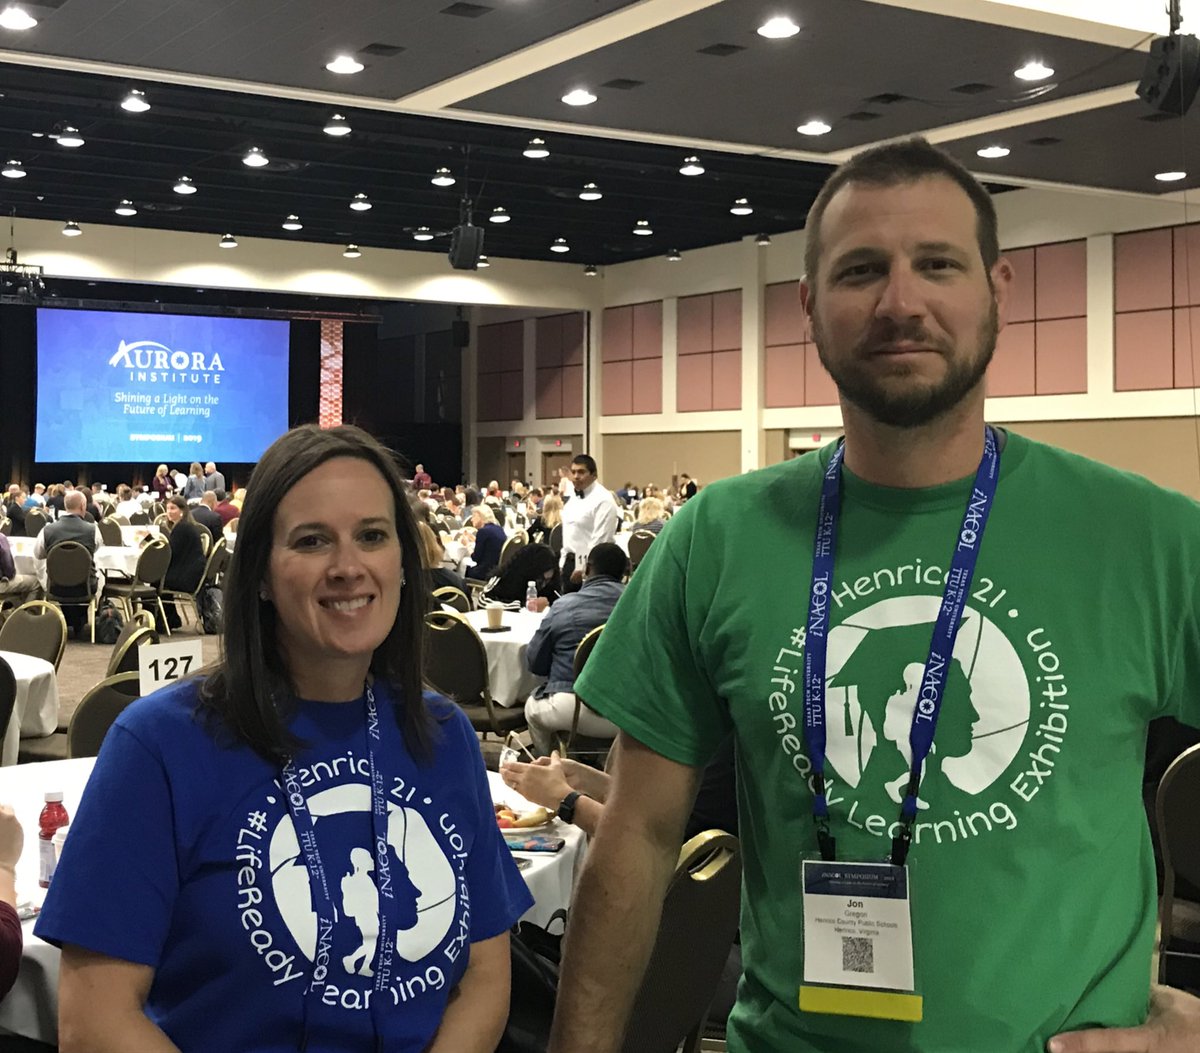 #Henrico21 tshirts ready here in Palm Springs, CA at the Aurora Institute #iNACOL19 for @HenricoSchools #StudentShowstoppers session on Student Learning Exhibitions #LifeReady, another example how #VAis4Learners and that @HCPS_Innovates